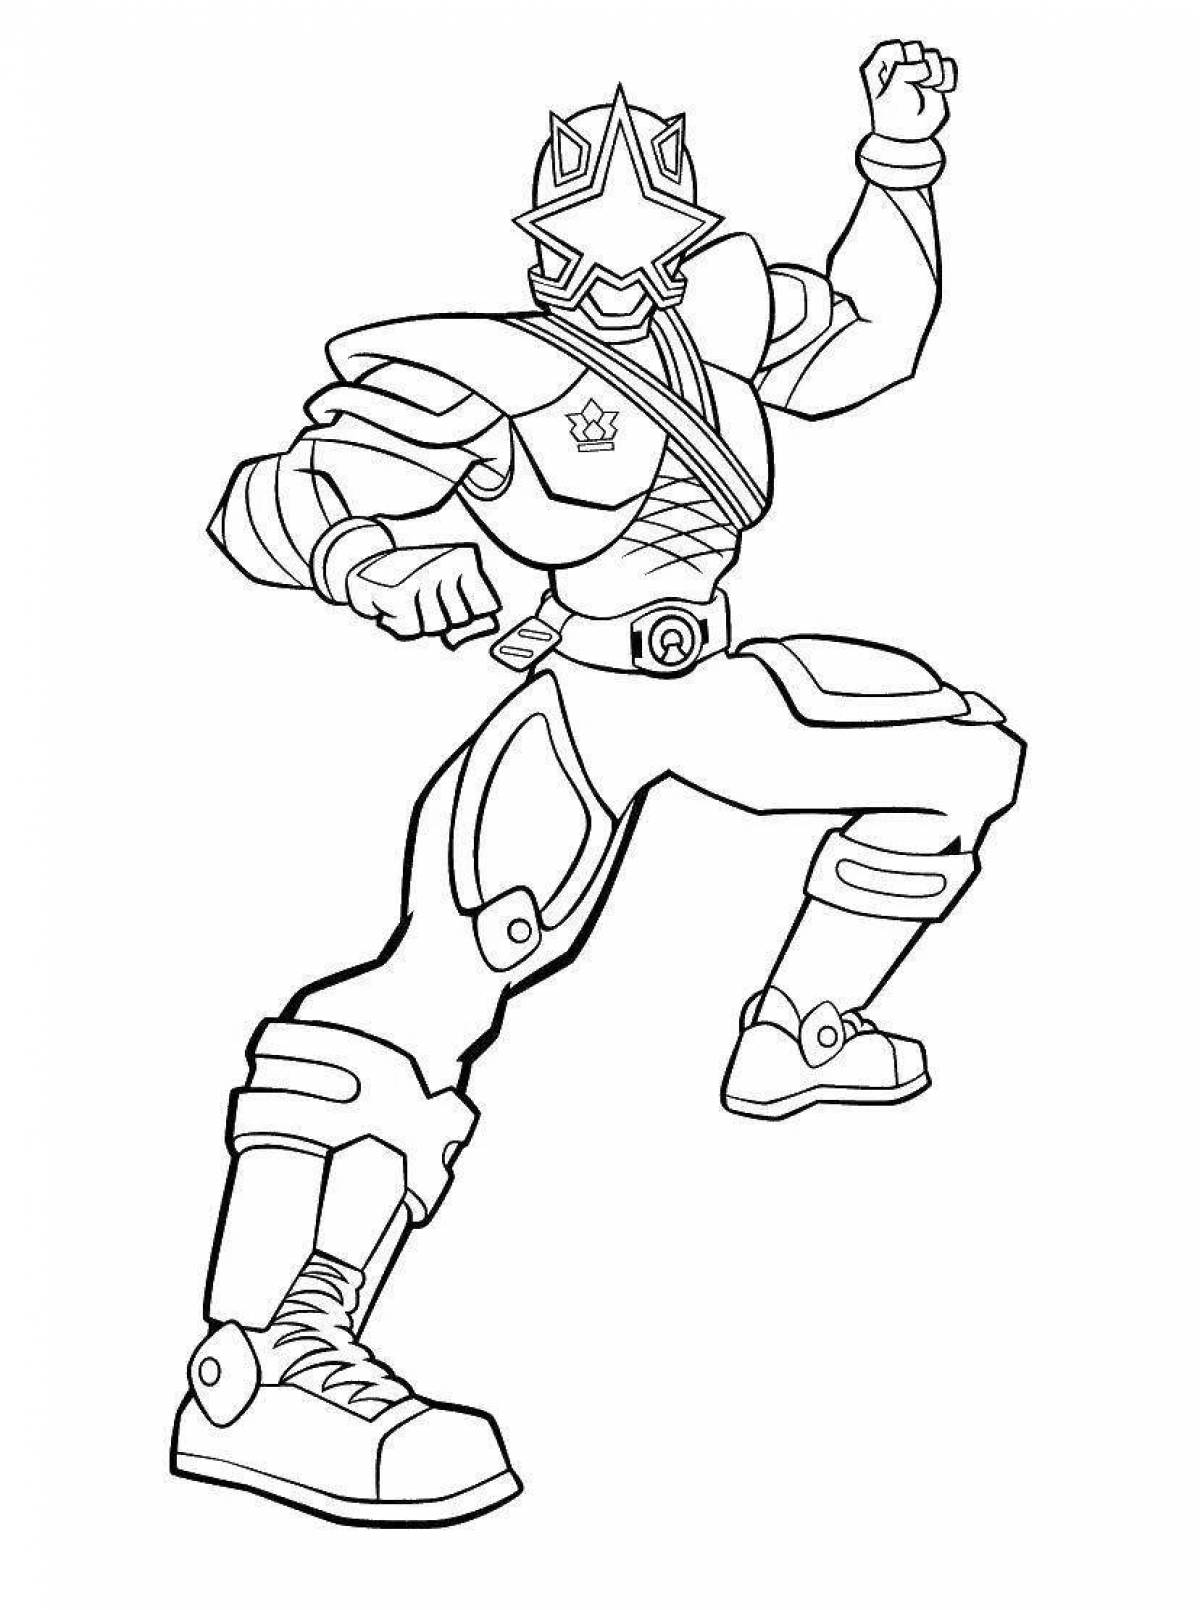 Majestic gearfighters coloring page